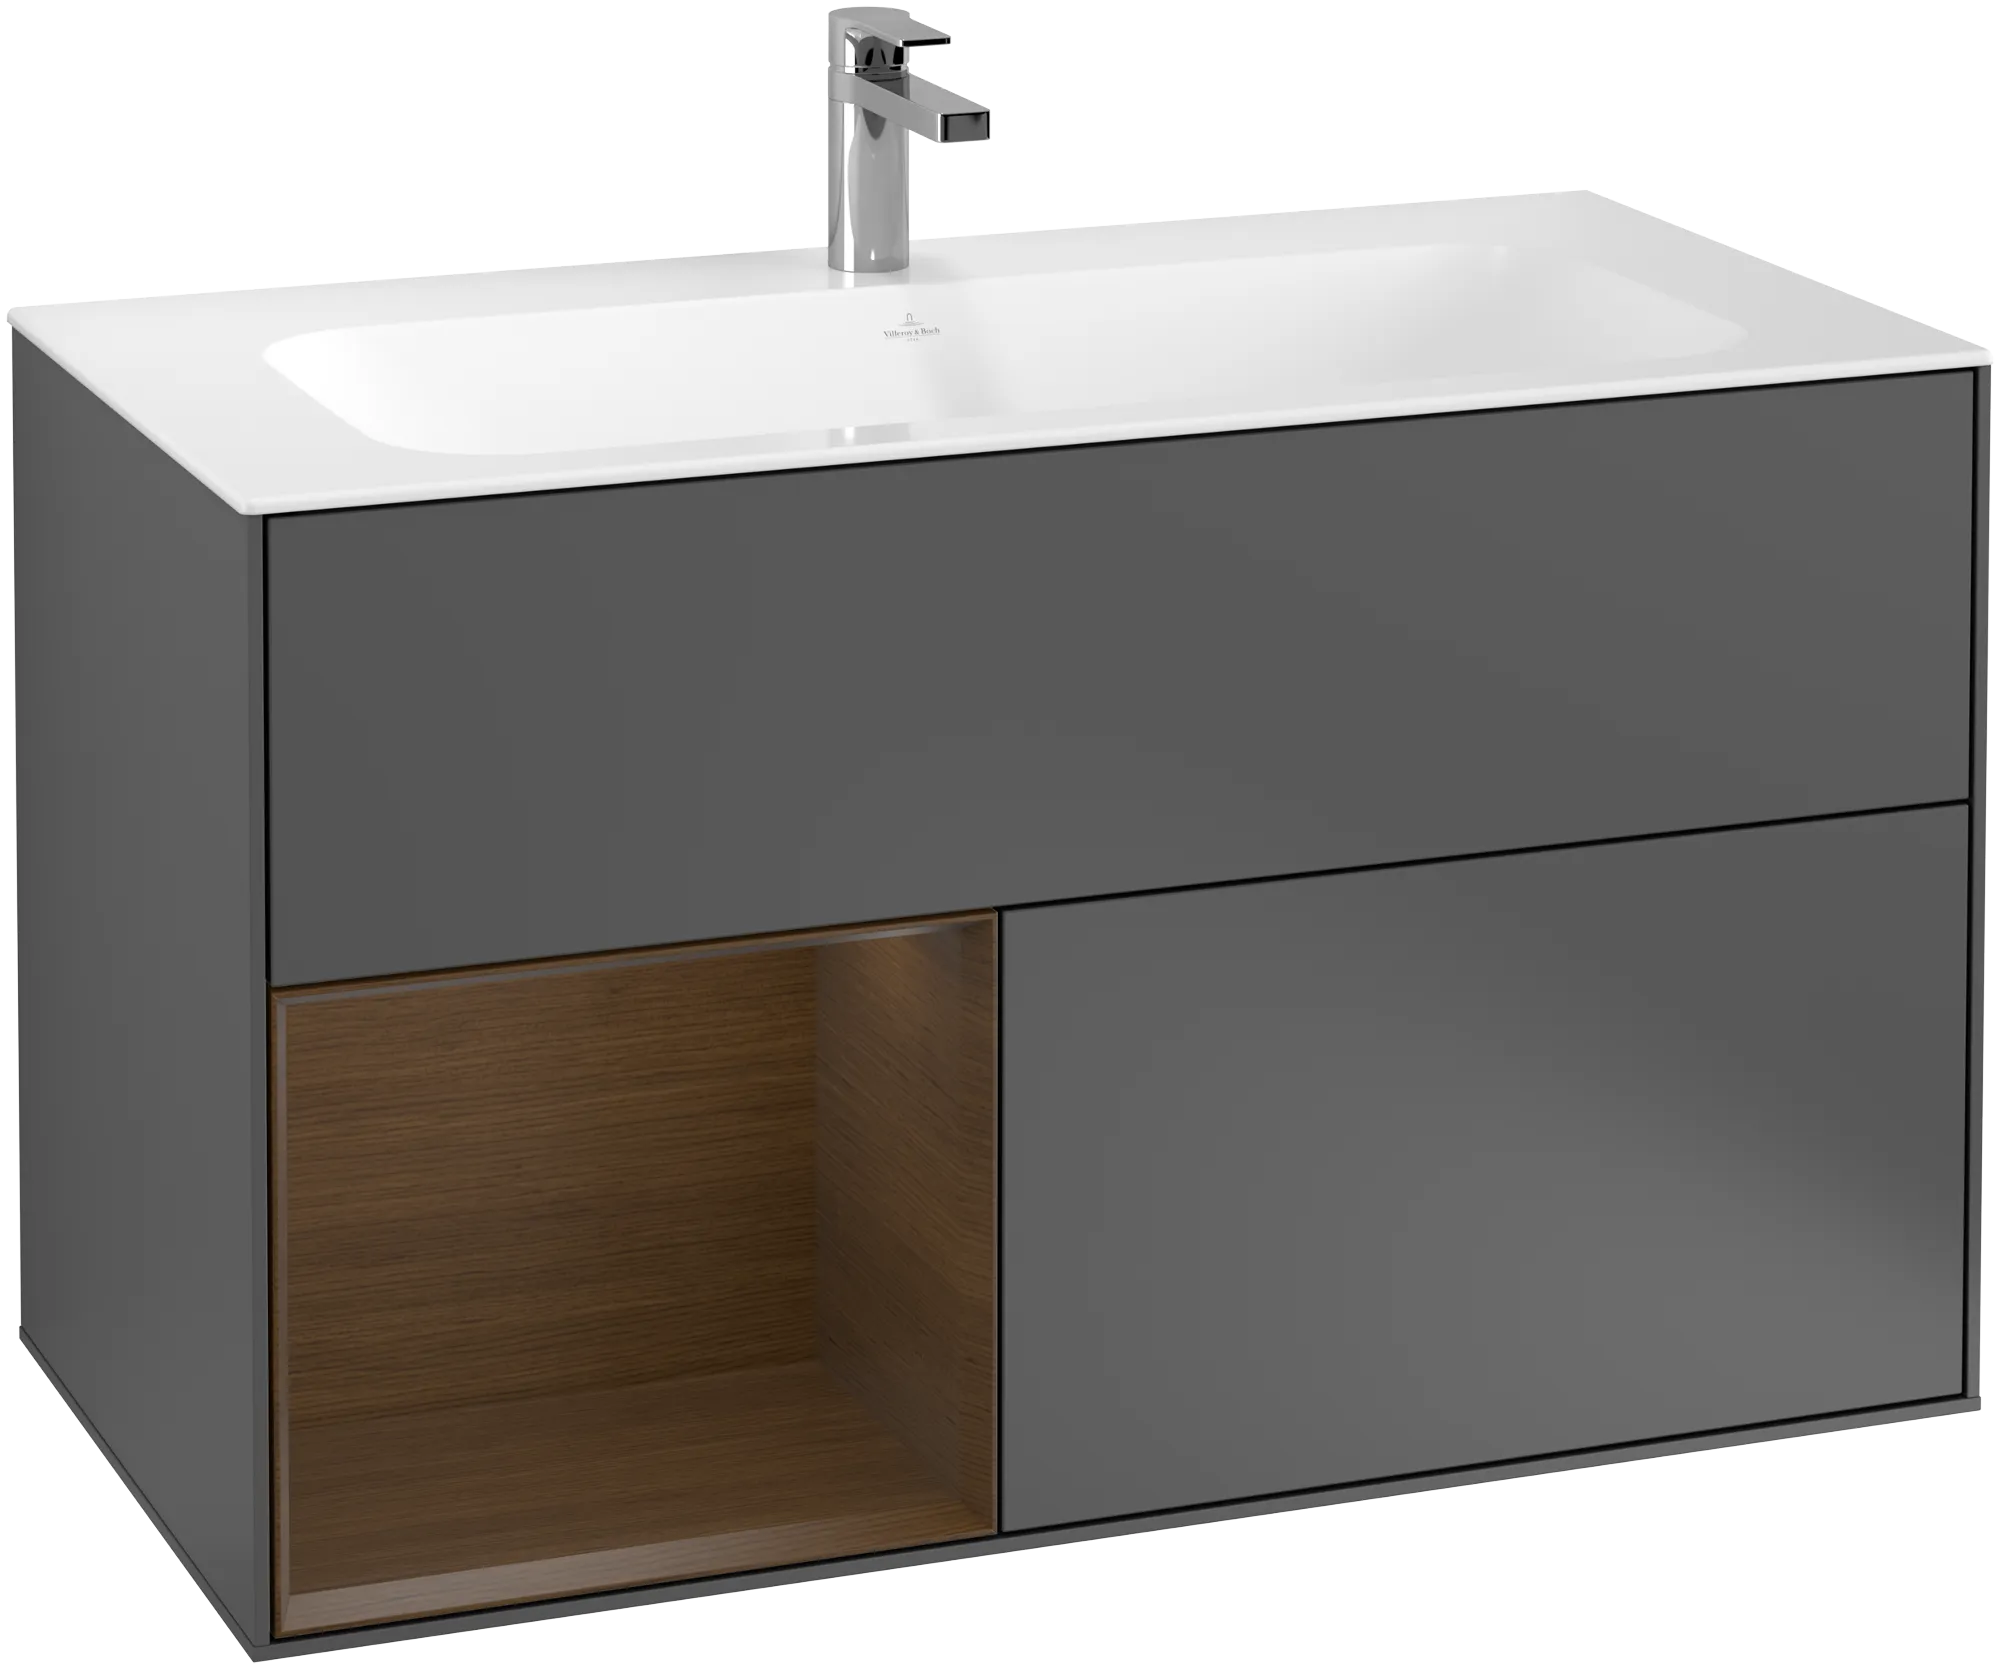 Picture of VILLEROY BOCH Finion Vanity unit, with lighting, 2 pull-out compartments, 996 x 591 x 498 mm, Anthracite Matt Lacquer / Walnut Veneer #G030GNGK